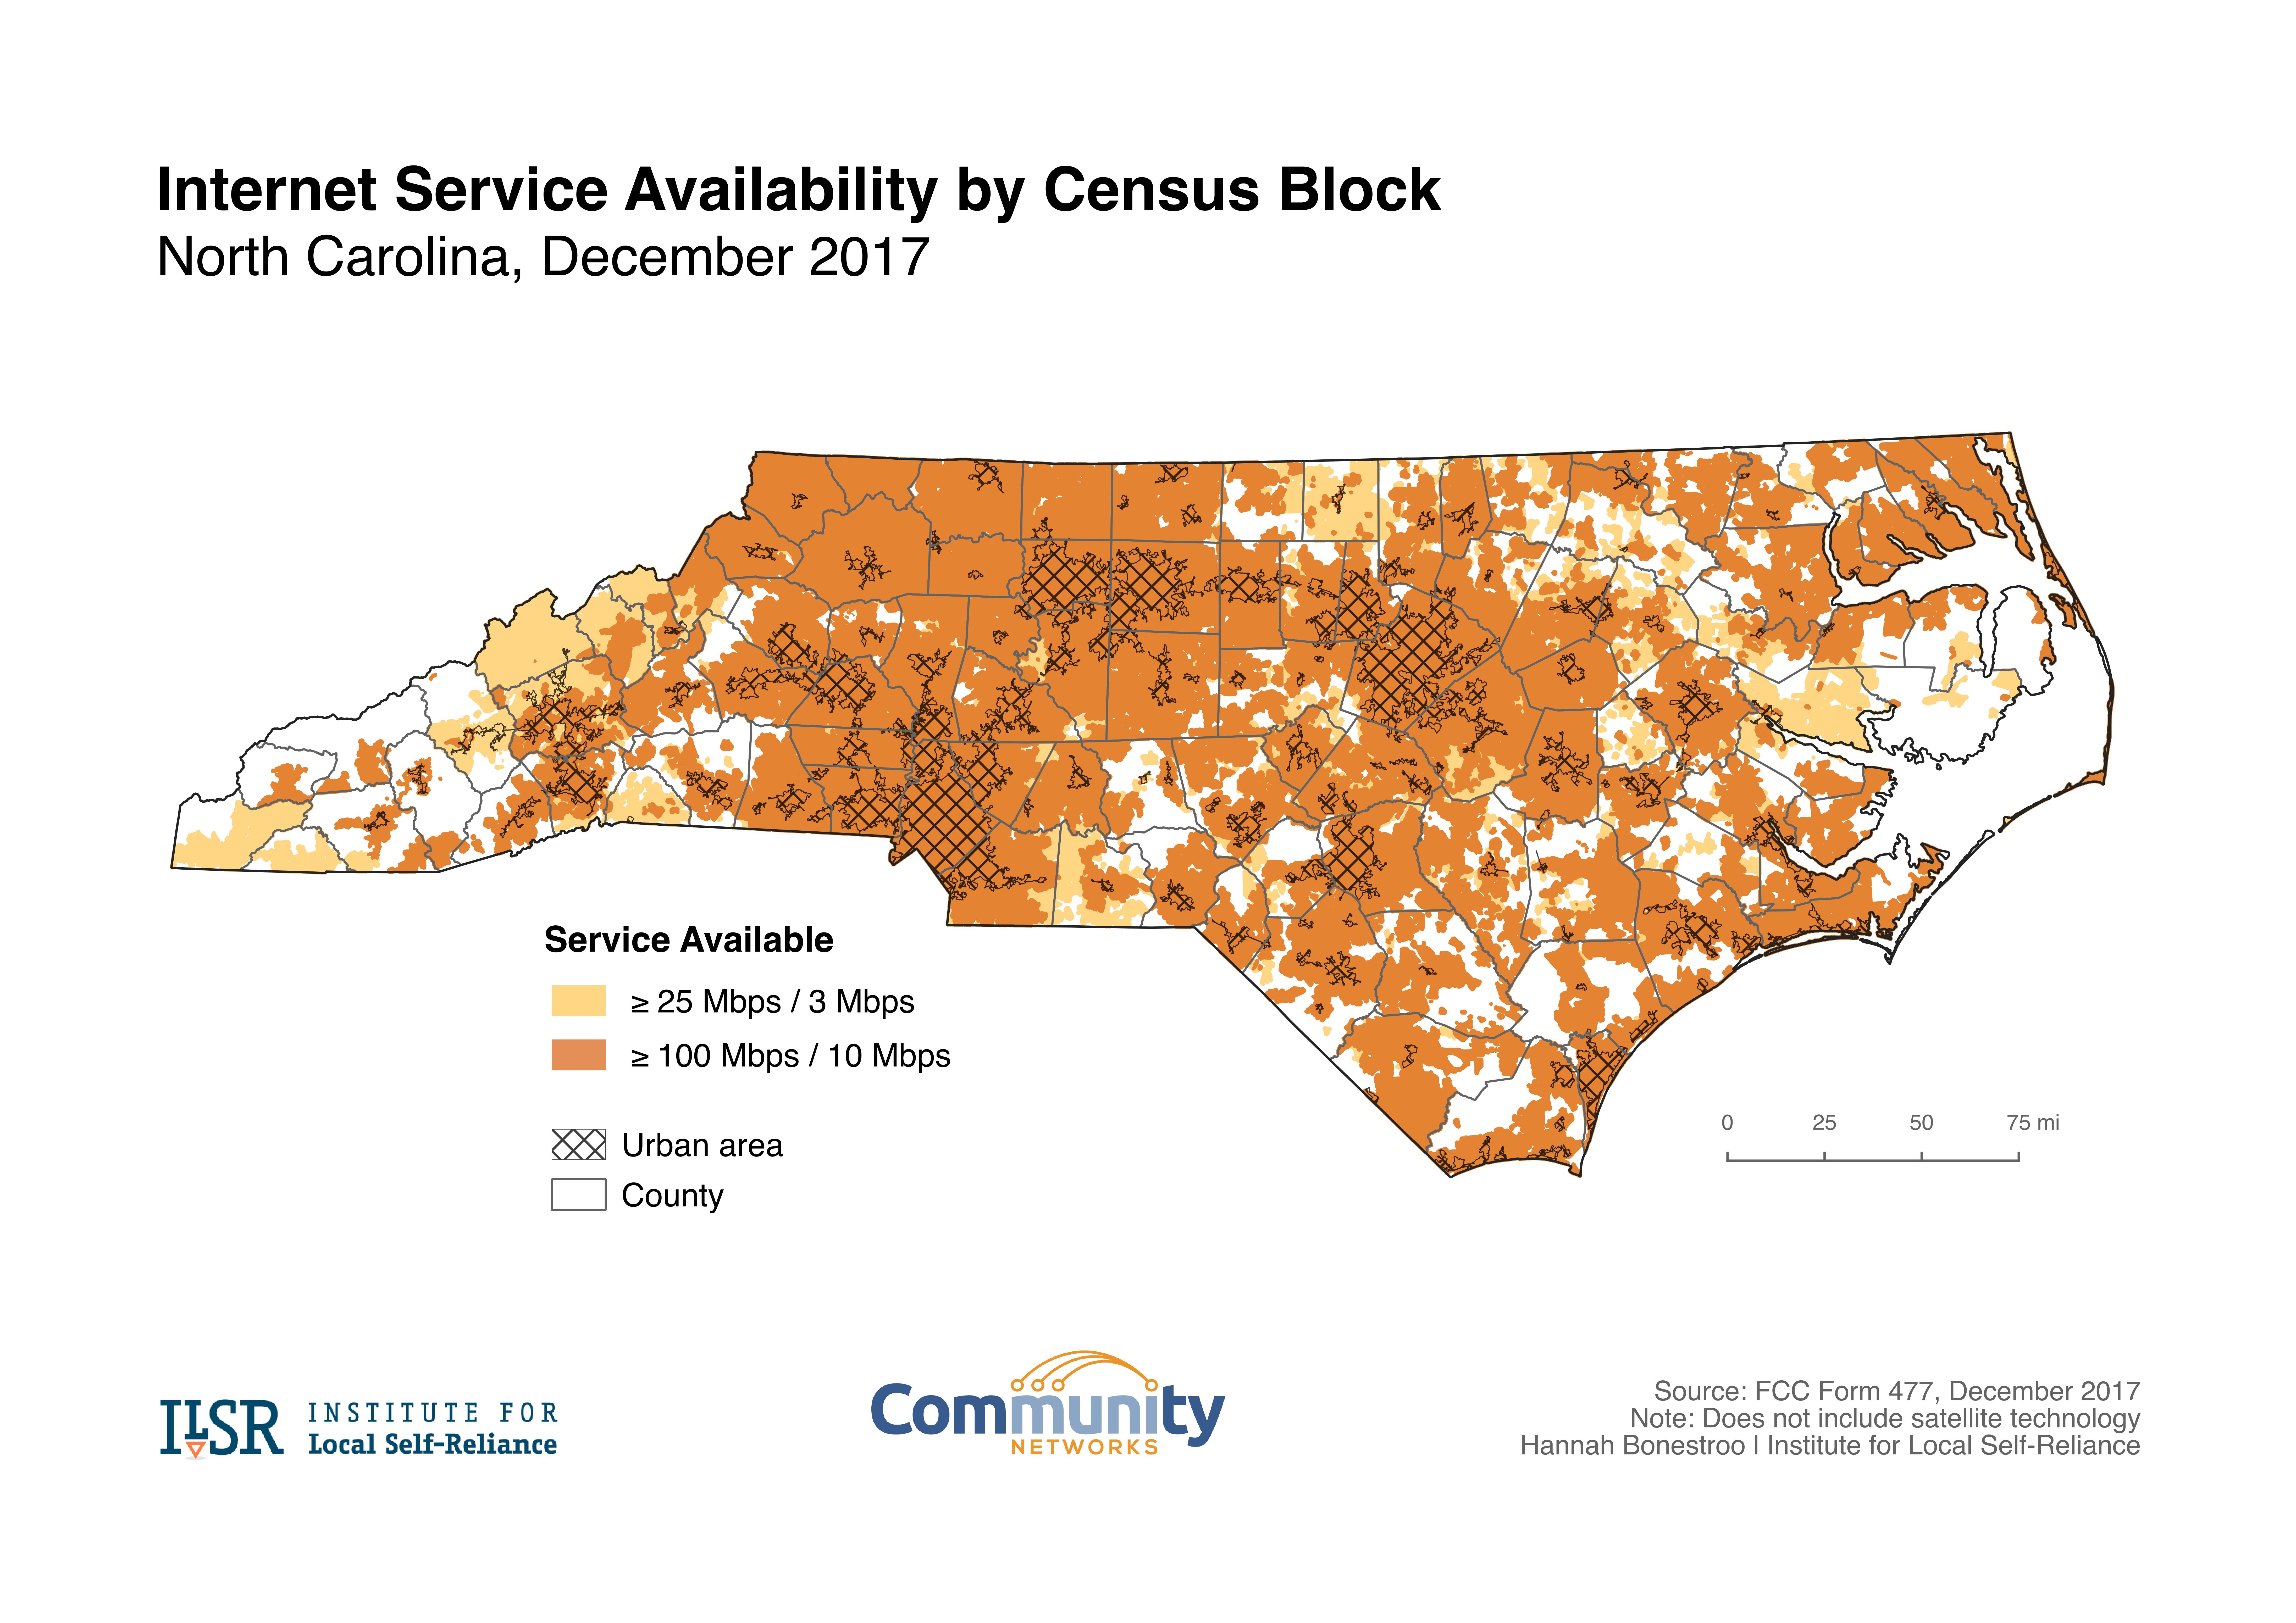 NC Internet Service Availability by County